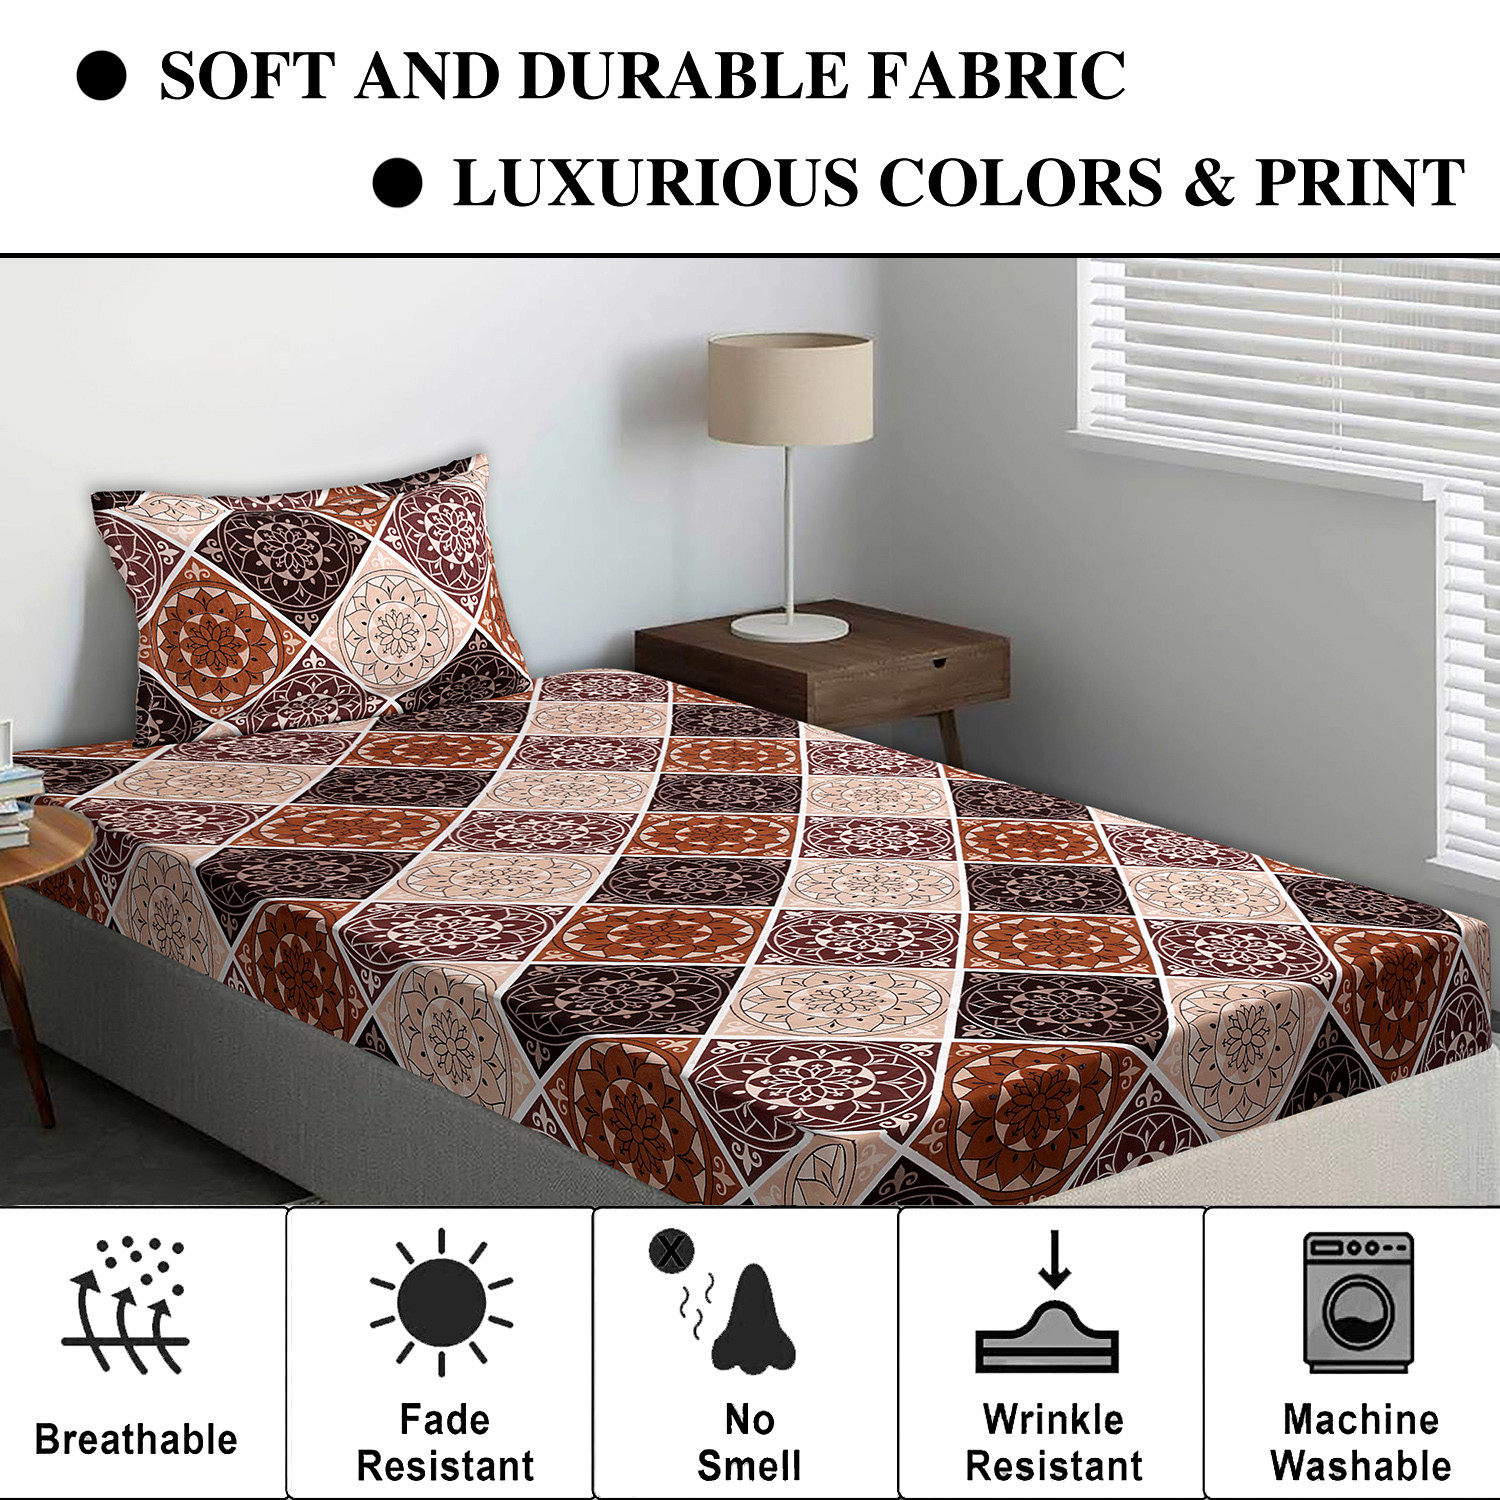 Kuber Industries Glance Cotton Rangoli Pattern Single Bedsheet With 1 Pillow Cover,90x60, (Brown)